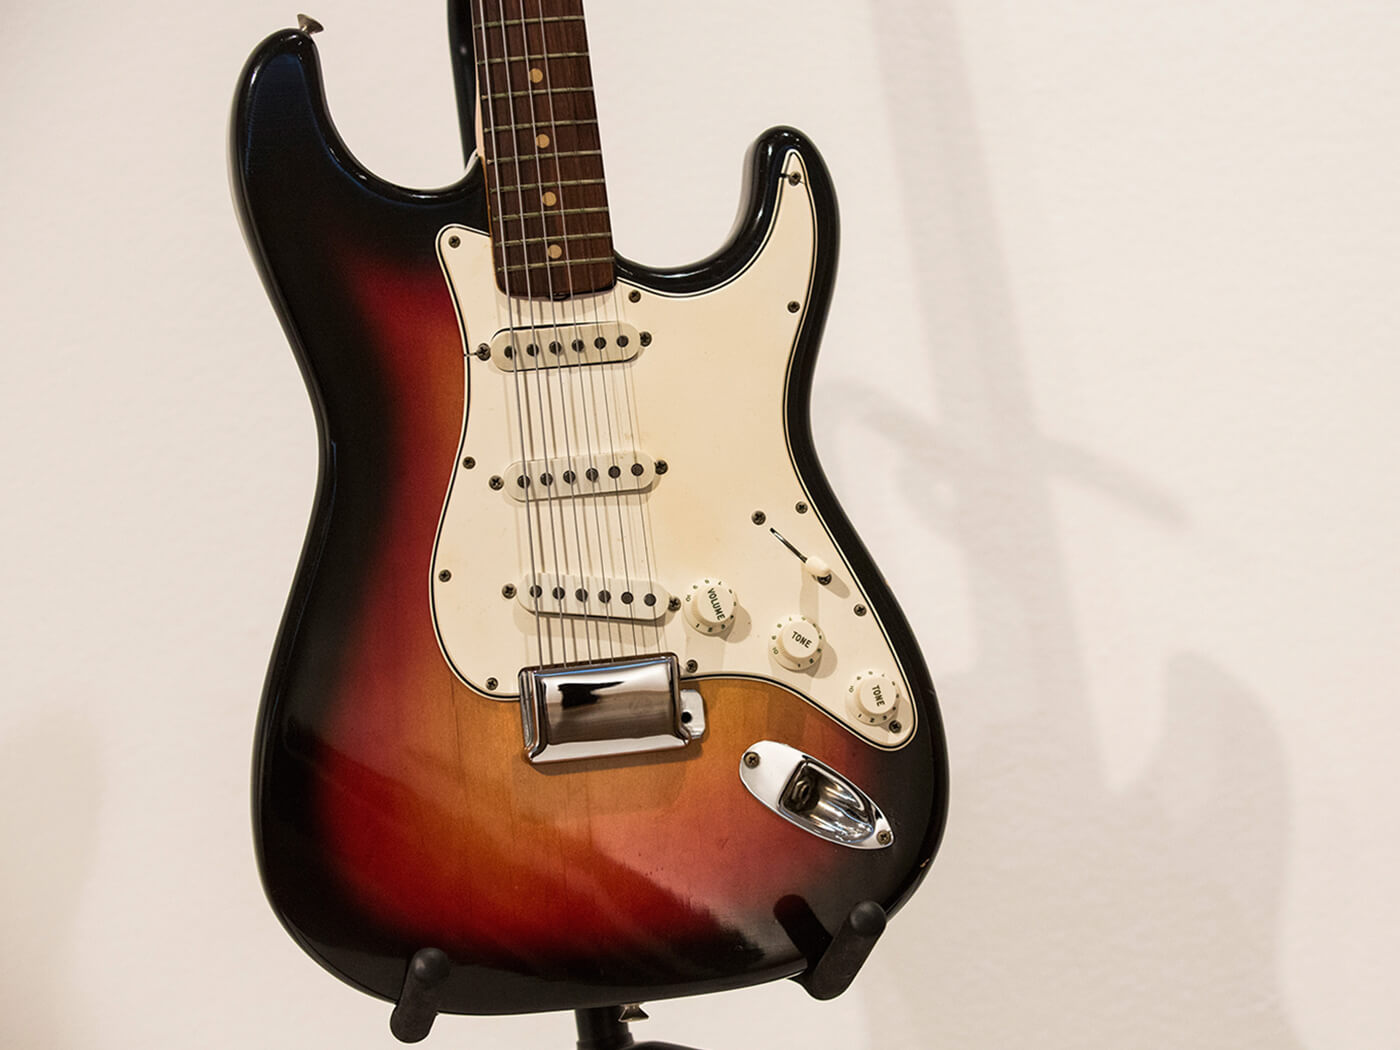 The Fender Stratocaster that Bob Dylan played at the 1965 Newport Folk Festival on display at an auction preview at Christie’s in 2013, photo by Andrew Burton/Getty Images